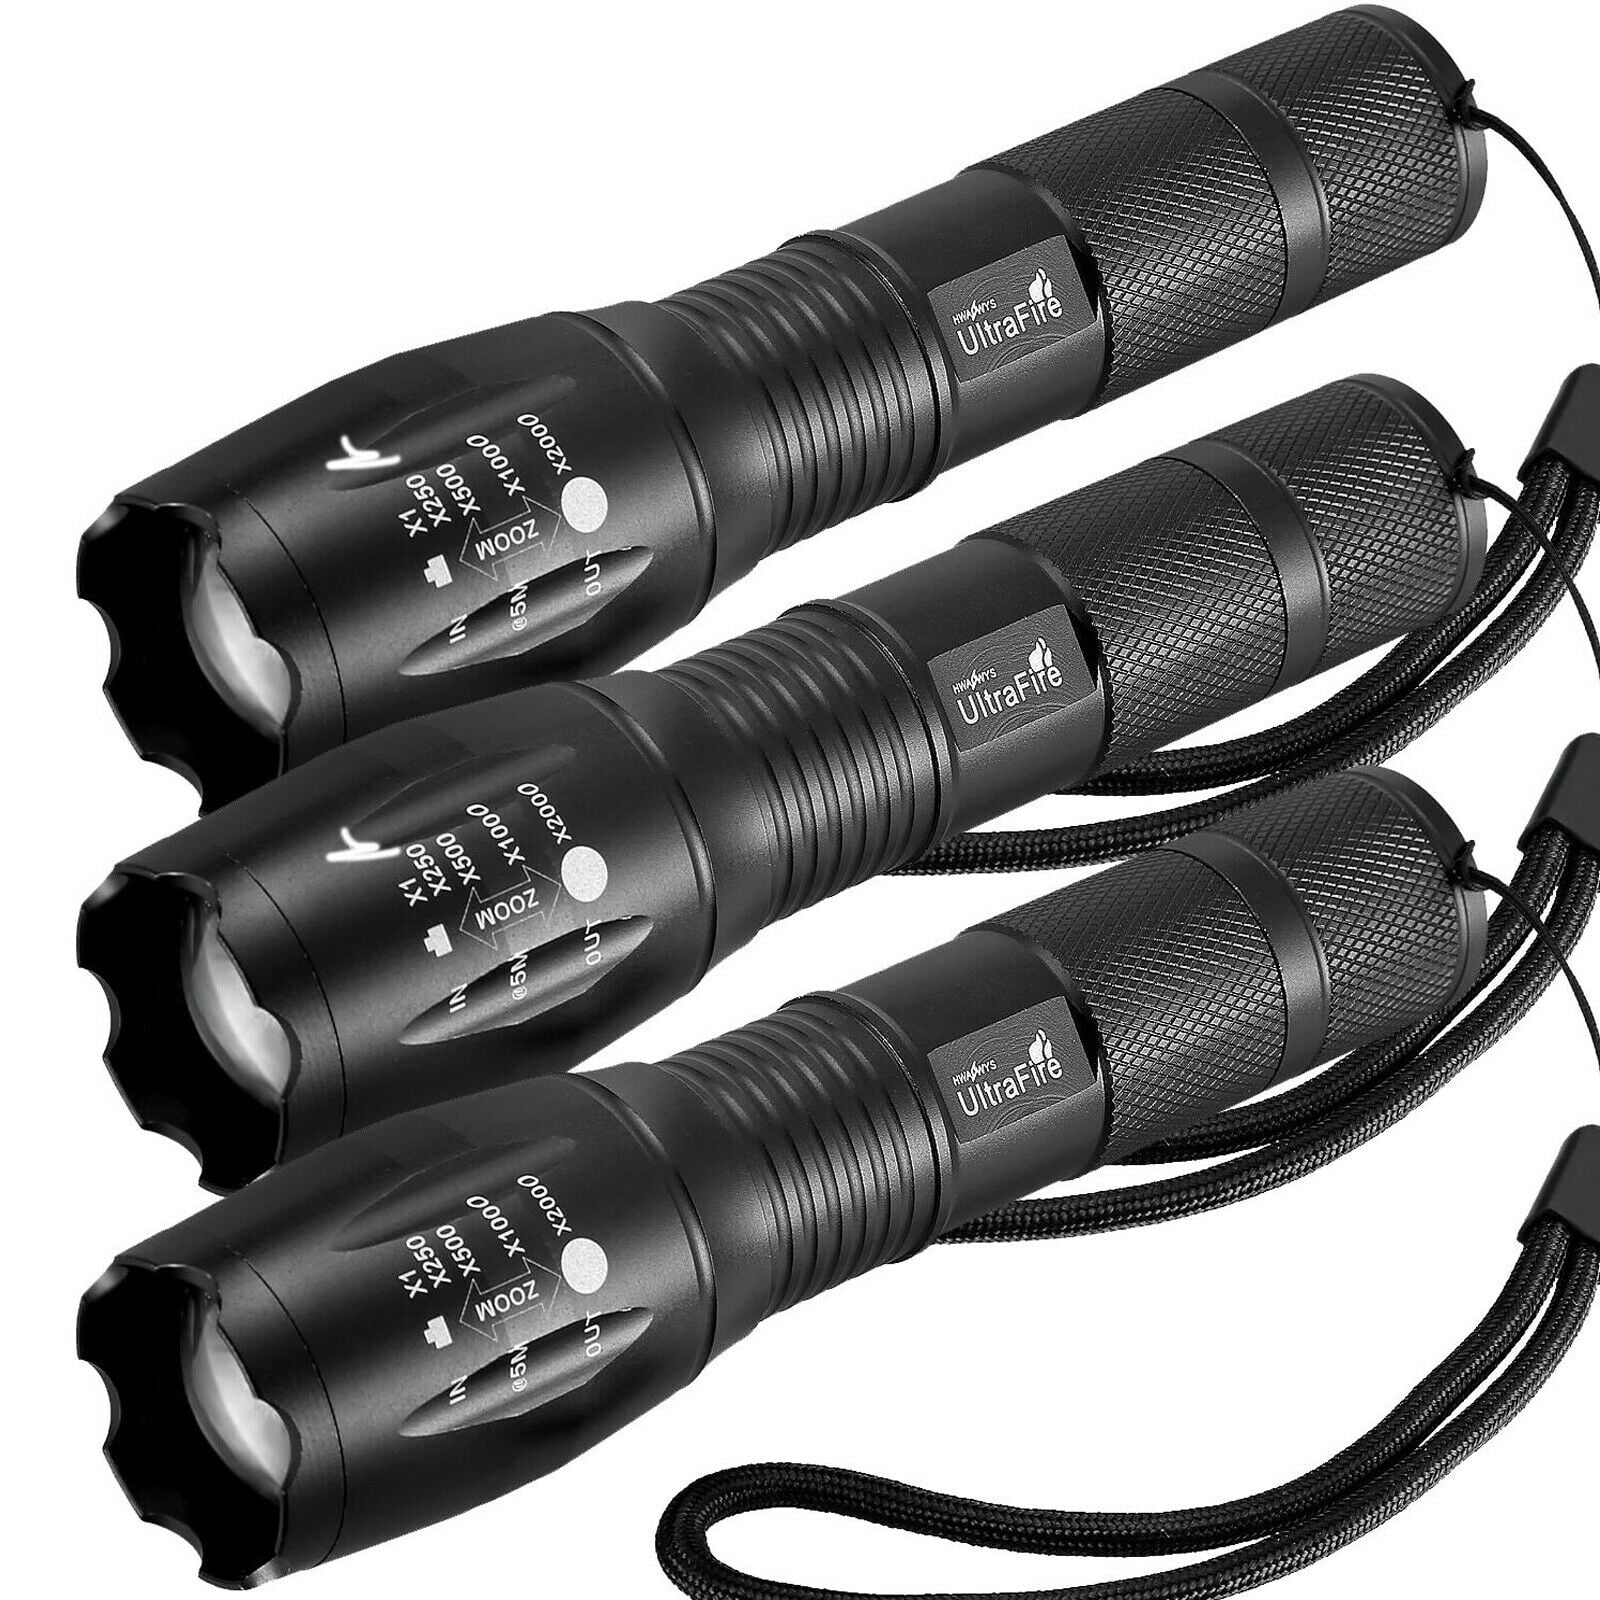 Tactical Ultrafire Flashlight T6 LED 18650 Torch 20000Lumen Zoomable Lamp Light+ 